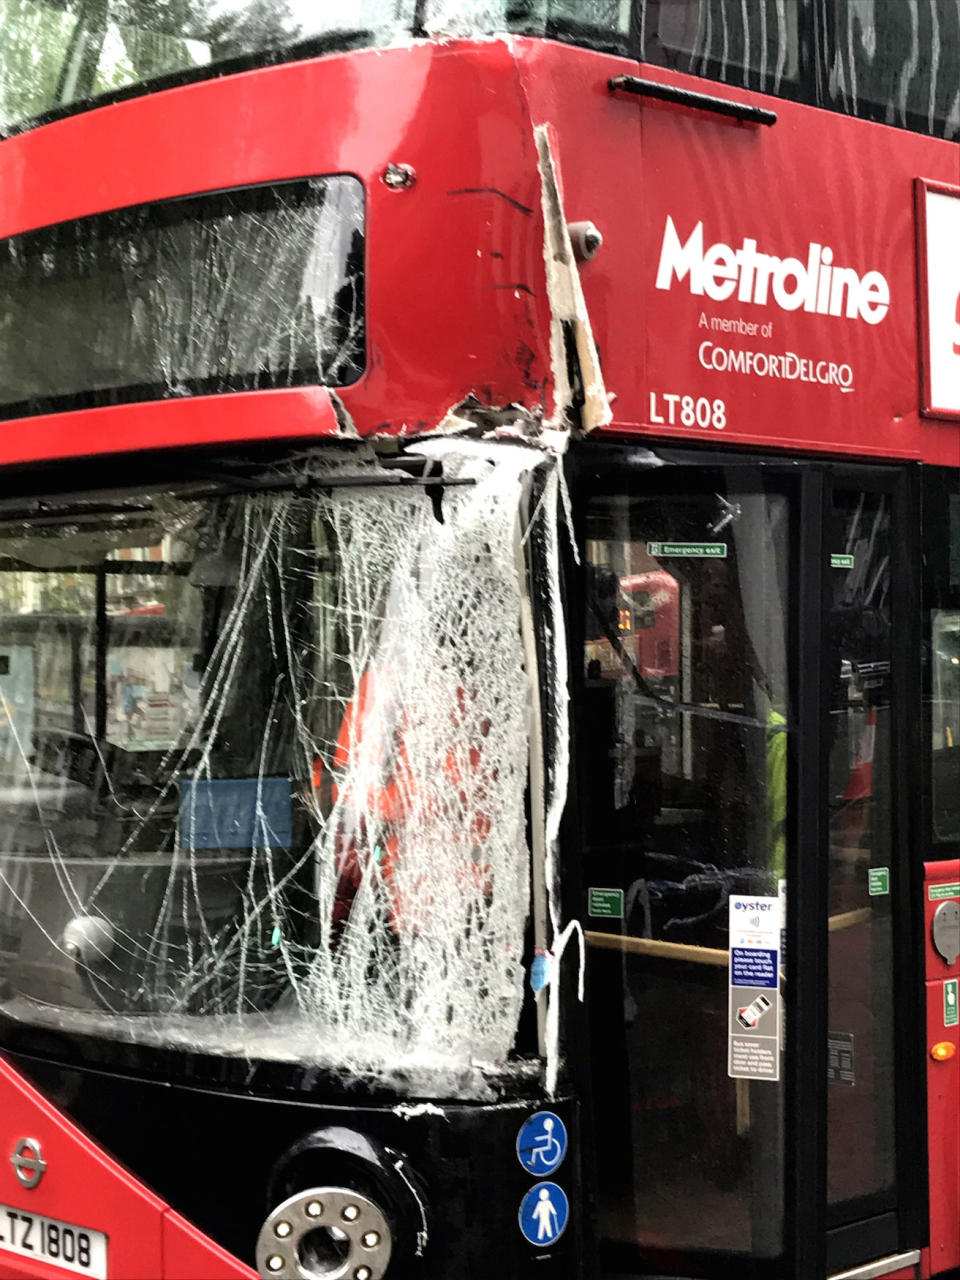 There was severe damage to the front of the bus (Picture: PA)